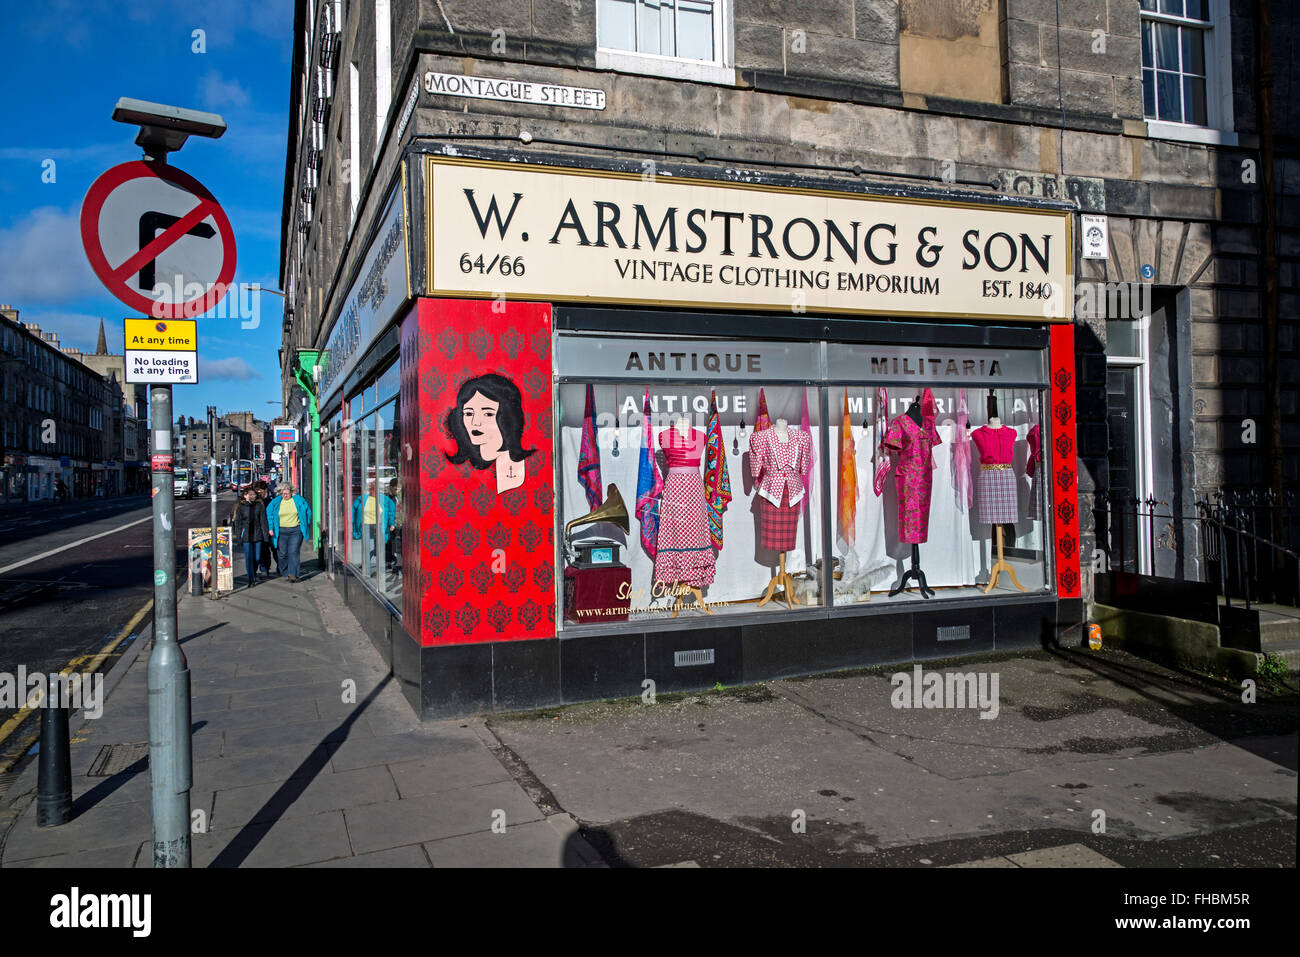 W Armstrong & Son, Vintage Clothing Emporium on the corner of Montague Street and Clerk Street in Edinburgh. Stock Photo